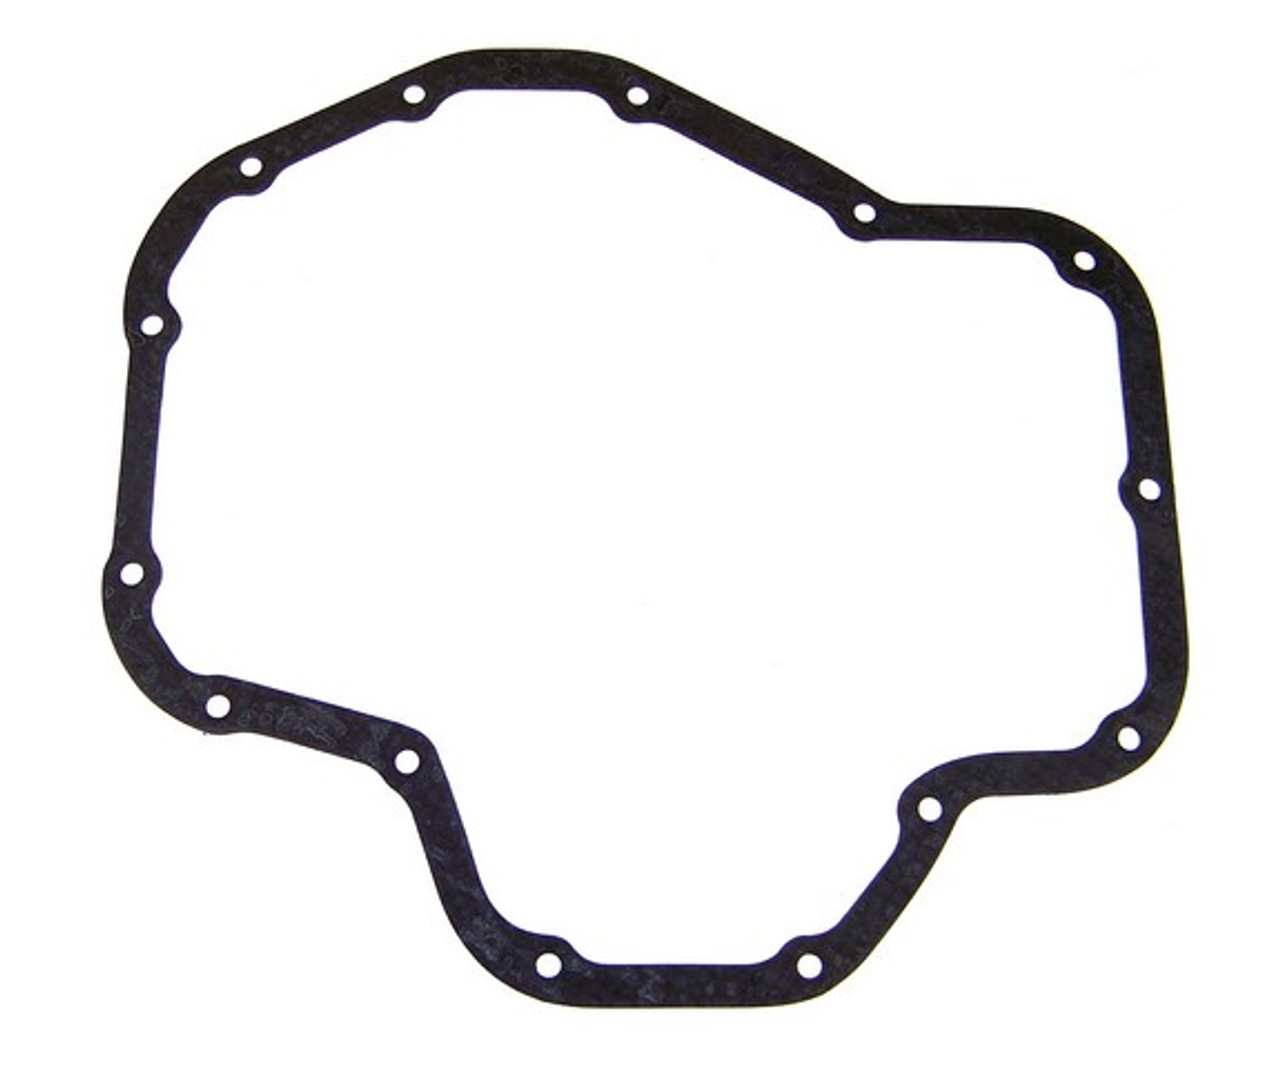 Oil Pan Gasket 2.4L 2009 Toyota Camry - PG917.27